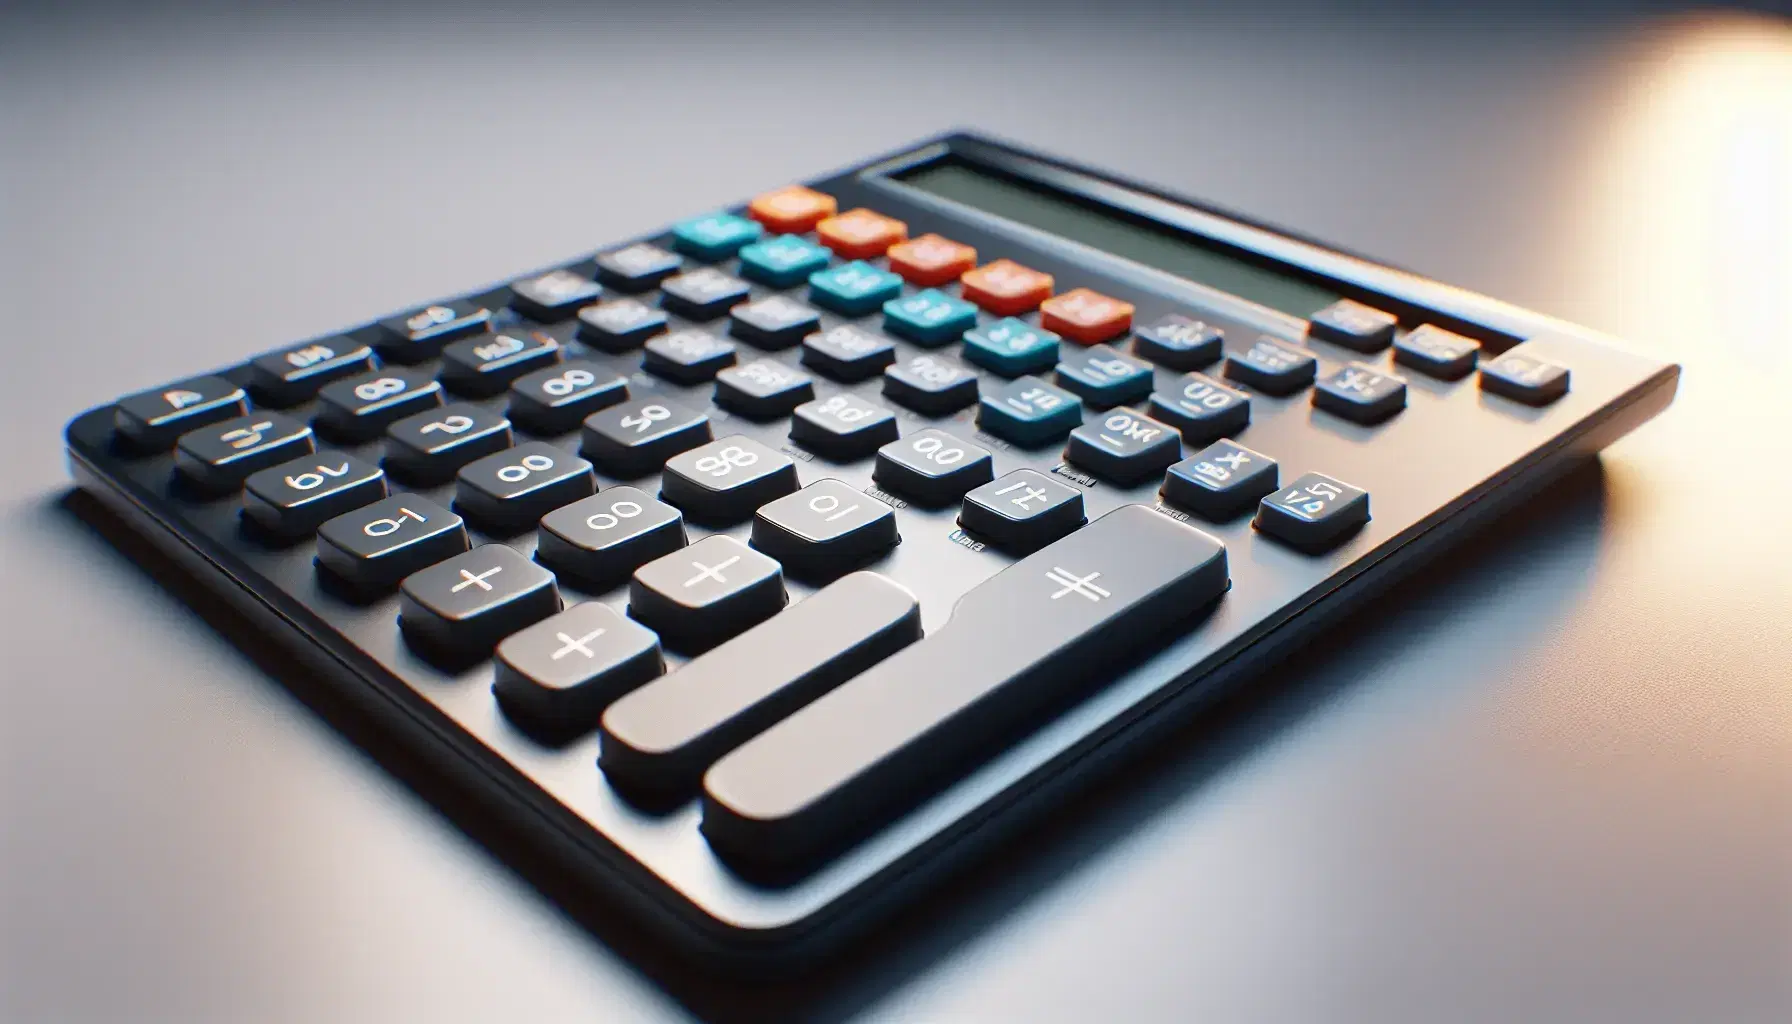 Close-up view of a scientific calculator keypad with dark grey numeric keys, light grey function keys, and bright special function keys, set against a blurred background.